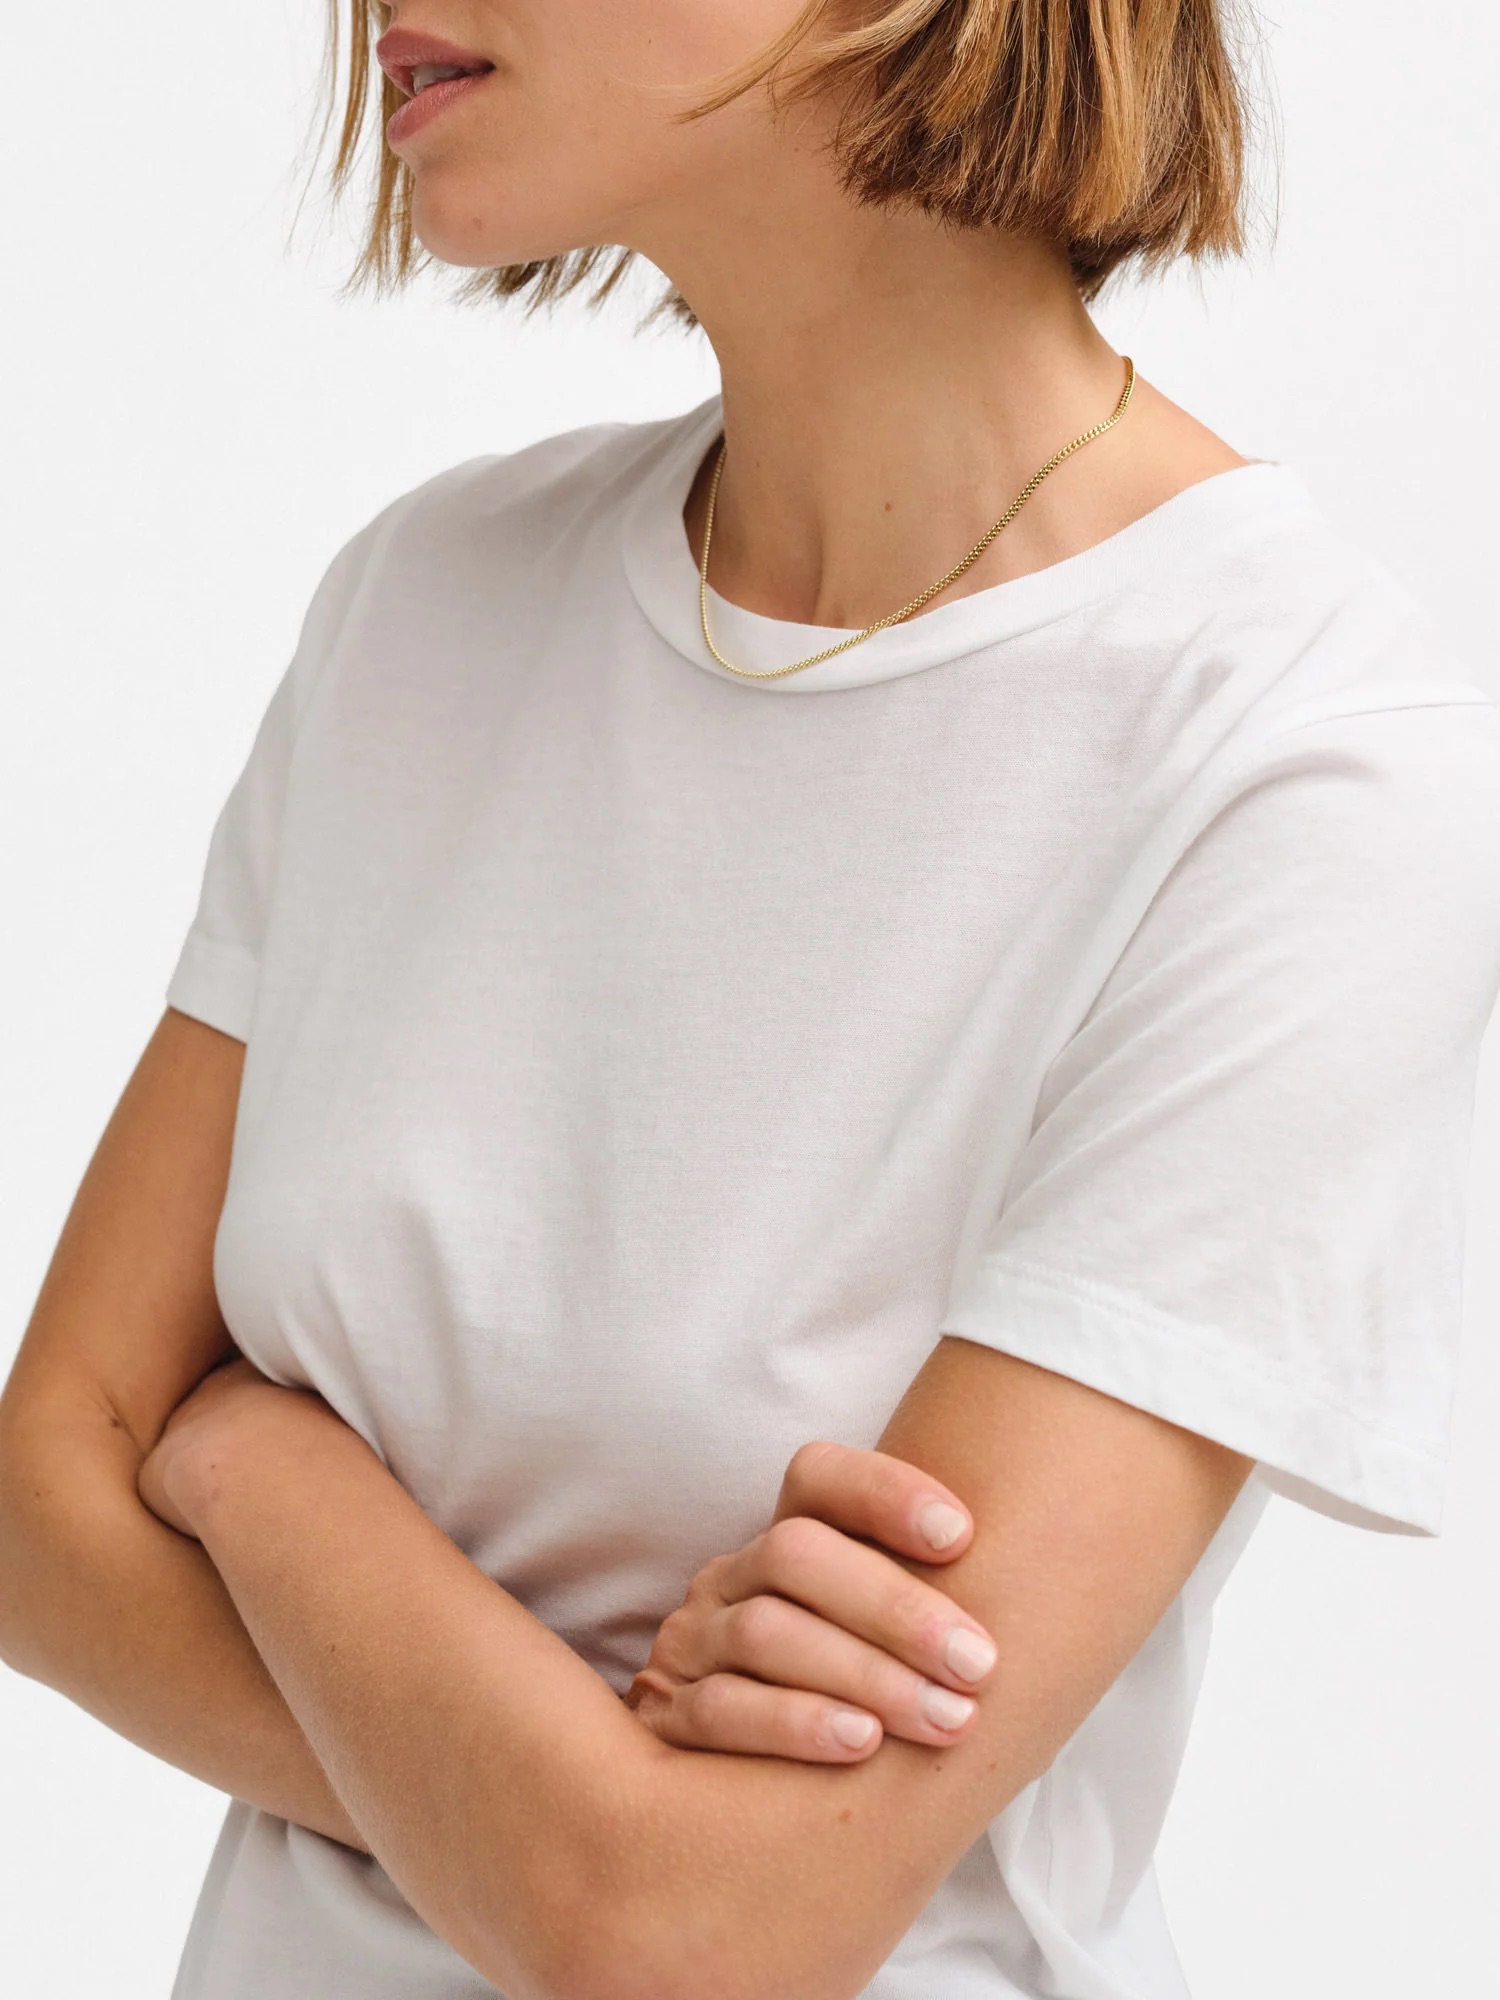 A person with short brown hair wearing a plain white t-shirt and a gold necklace, standing with arms crossed against a white background.